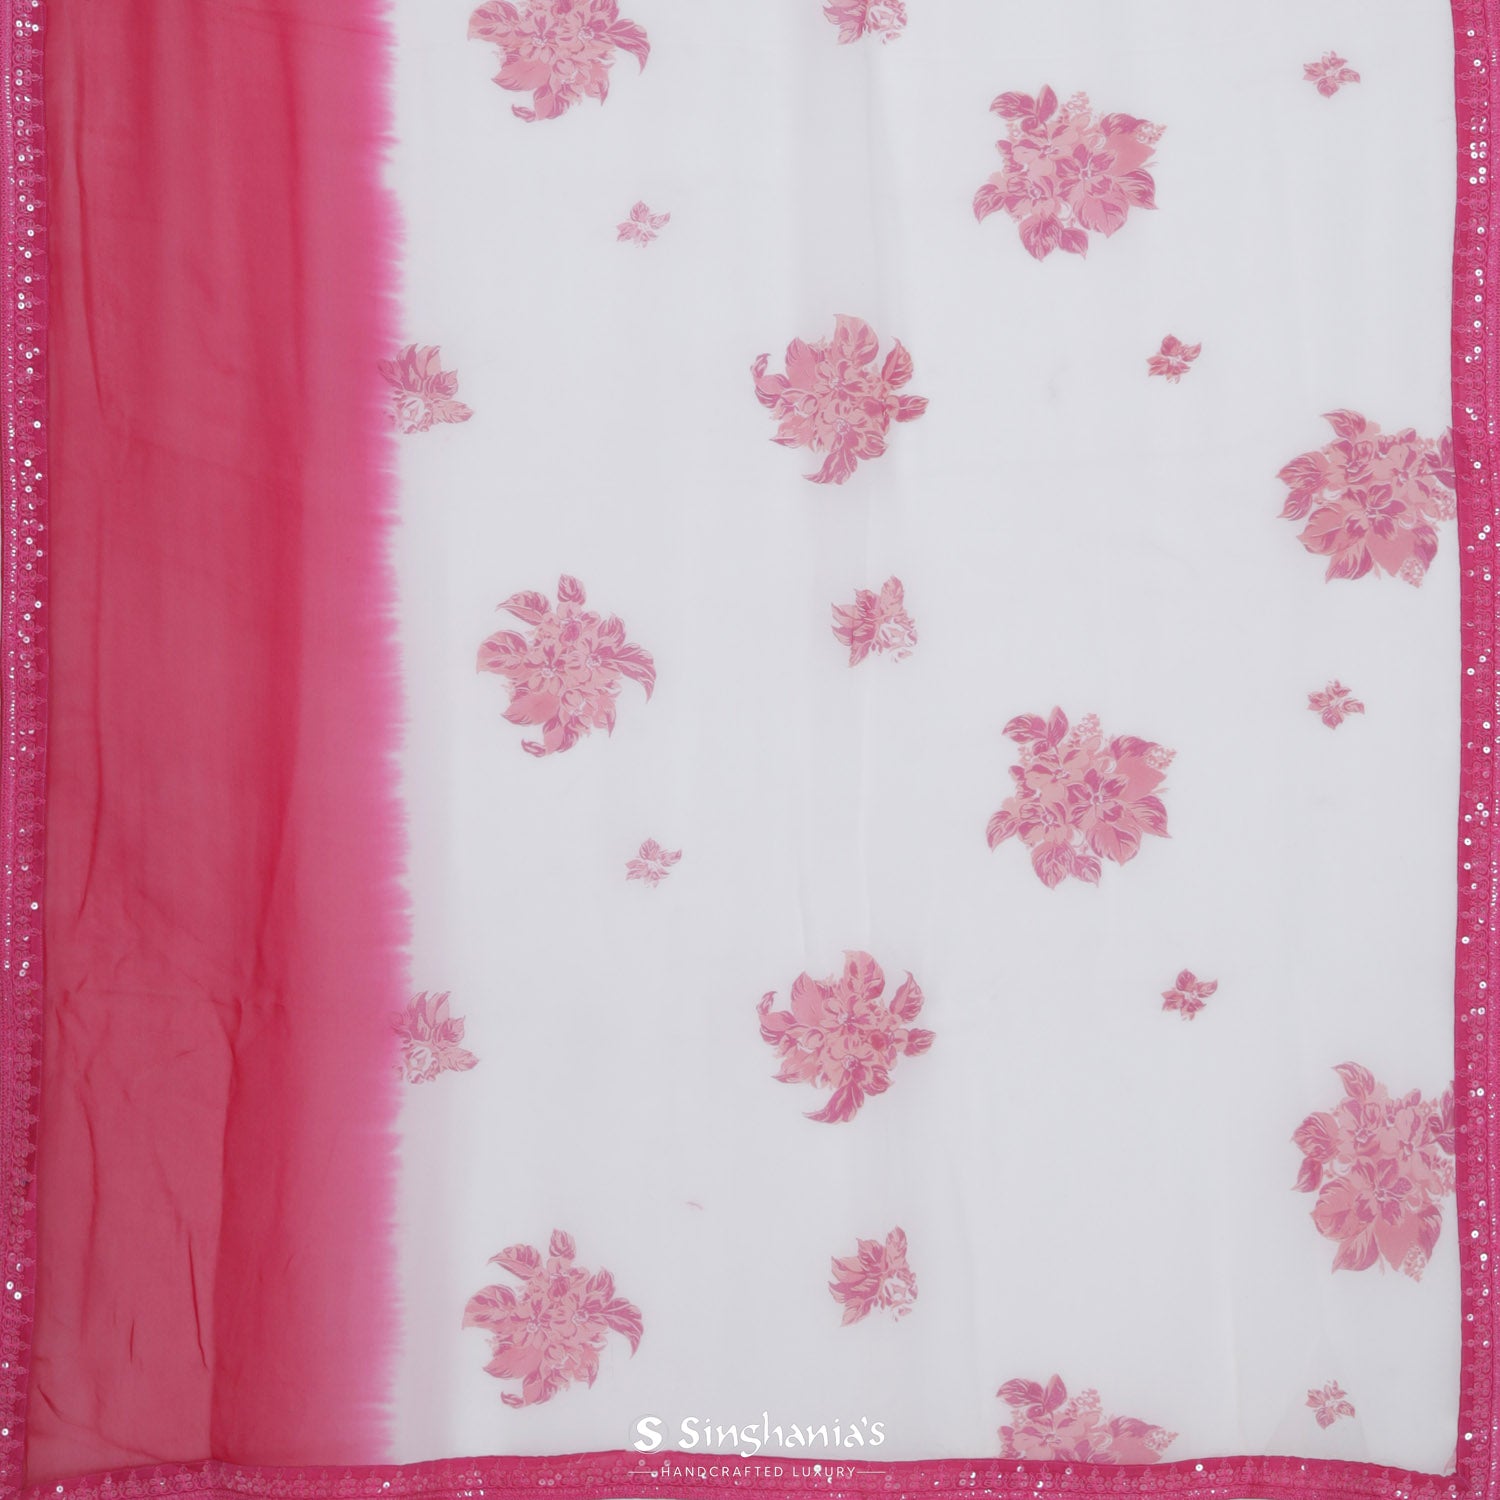 Frost White Printed Georgette Saree With Floral Pattern And Contrast Pink Big Border